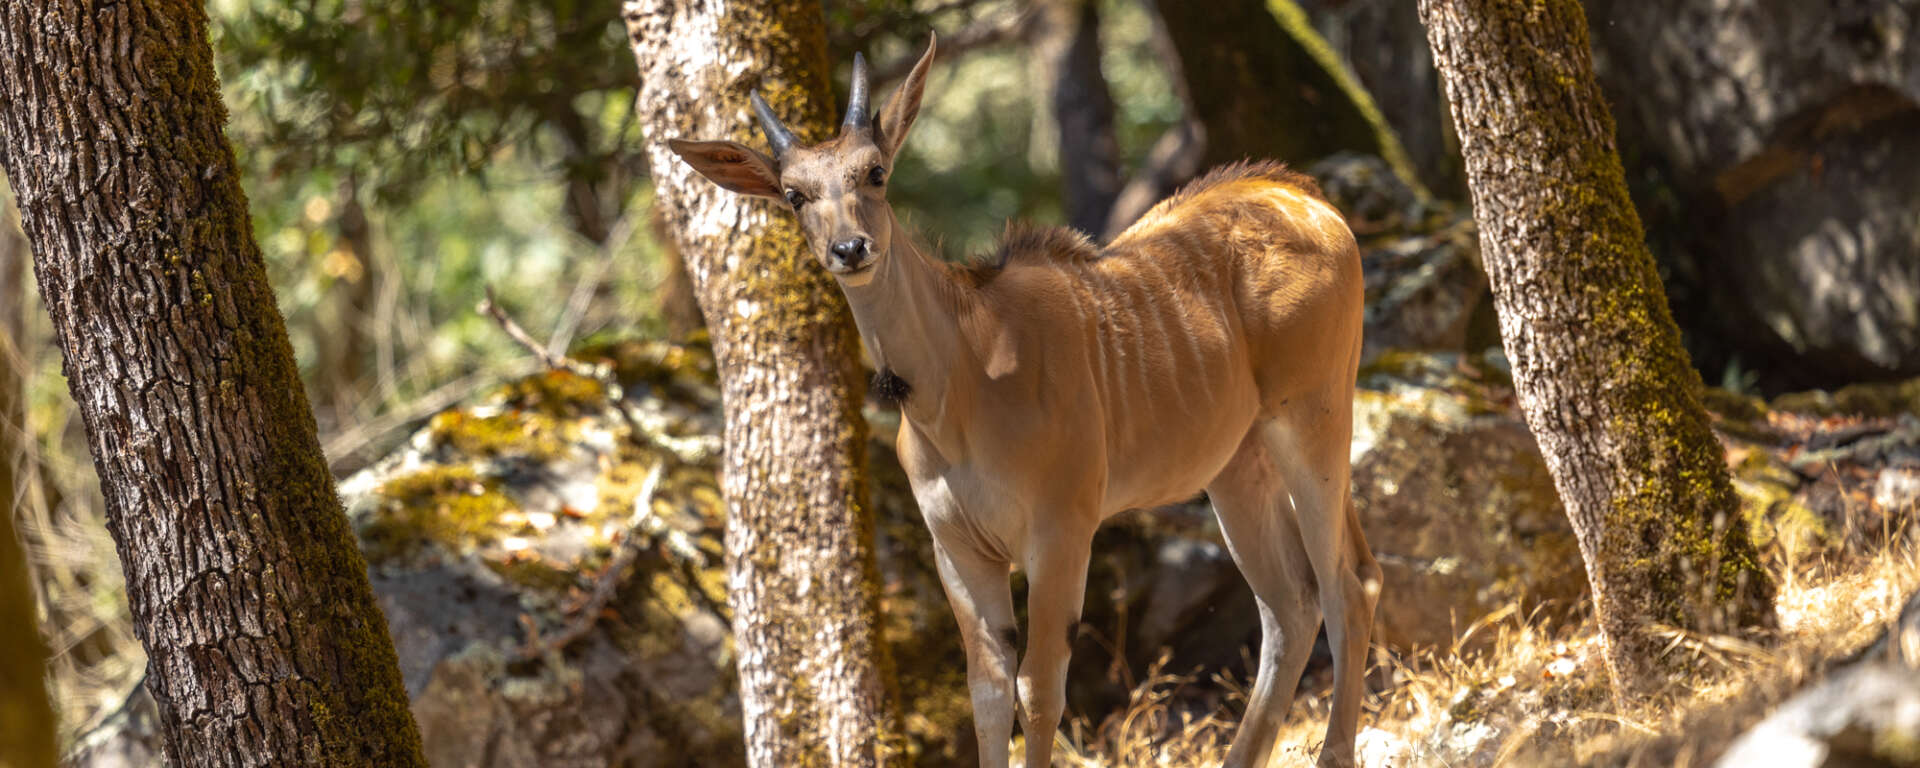 Strong Horn Brown Deer In The Forest